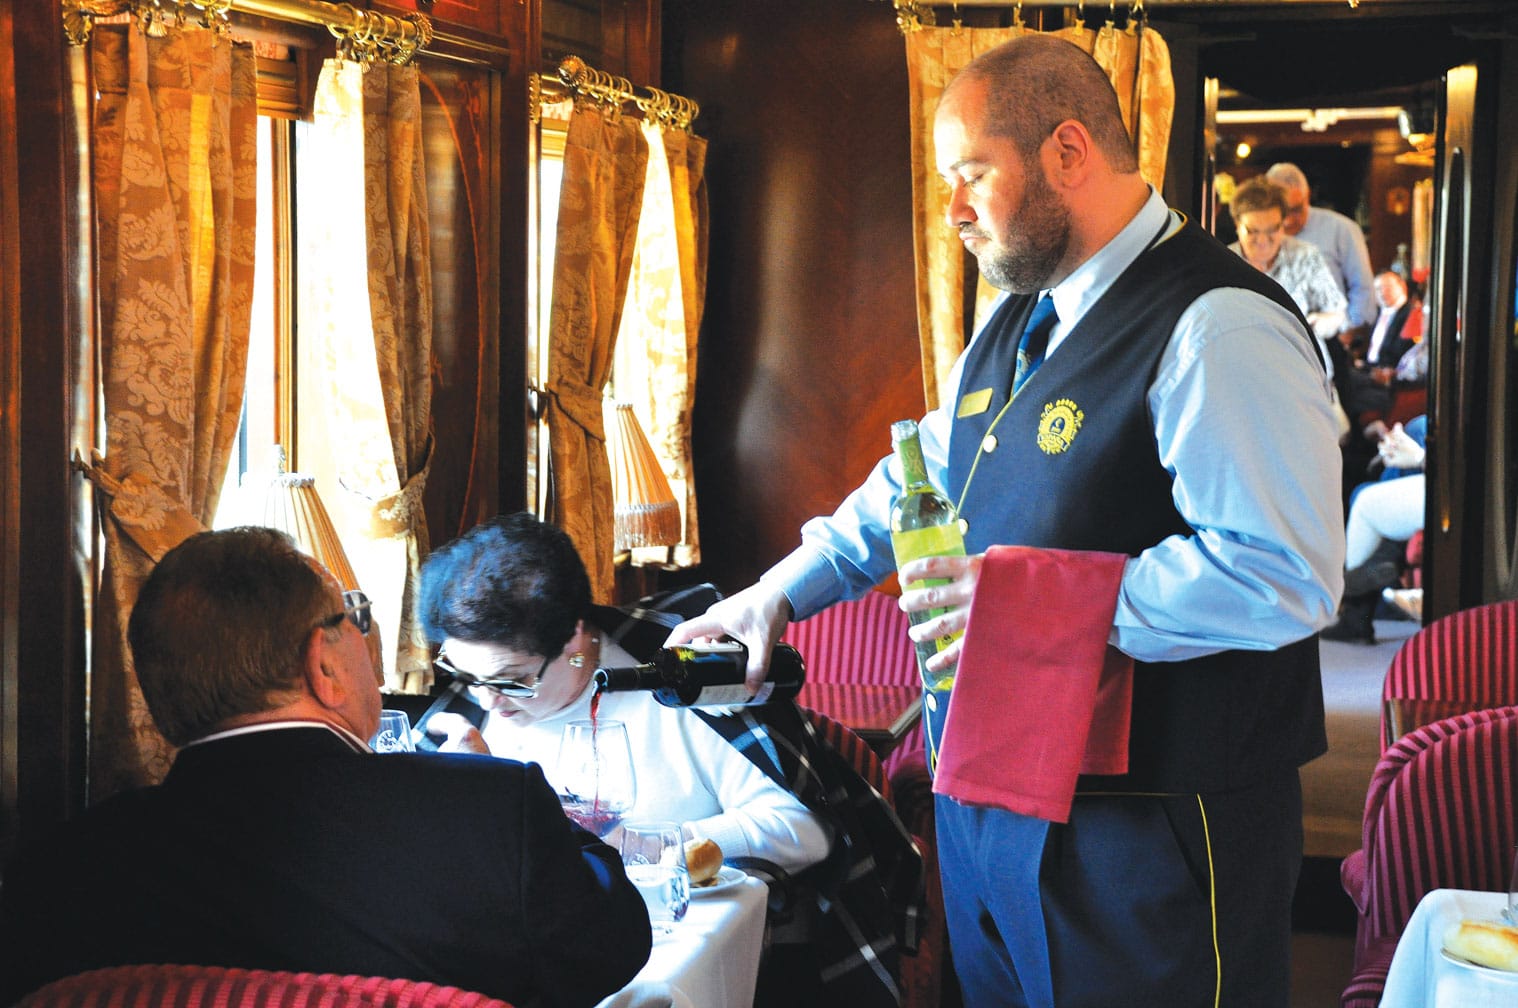 Server pouring wine on the Al Andalus train